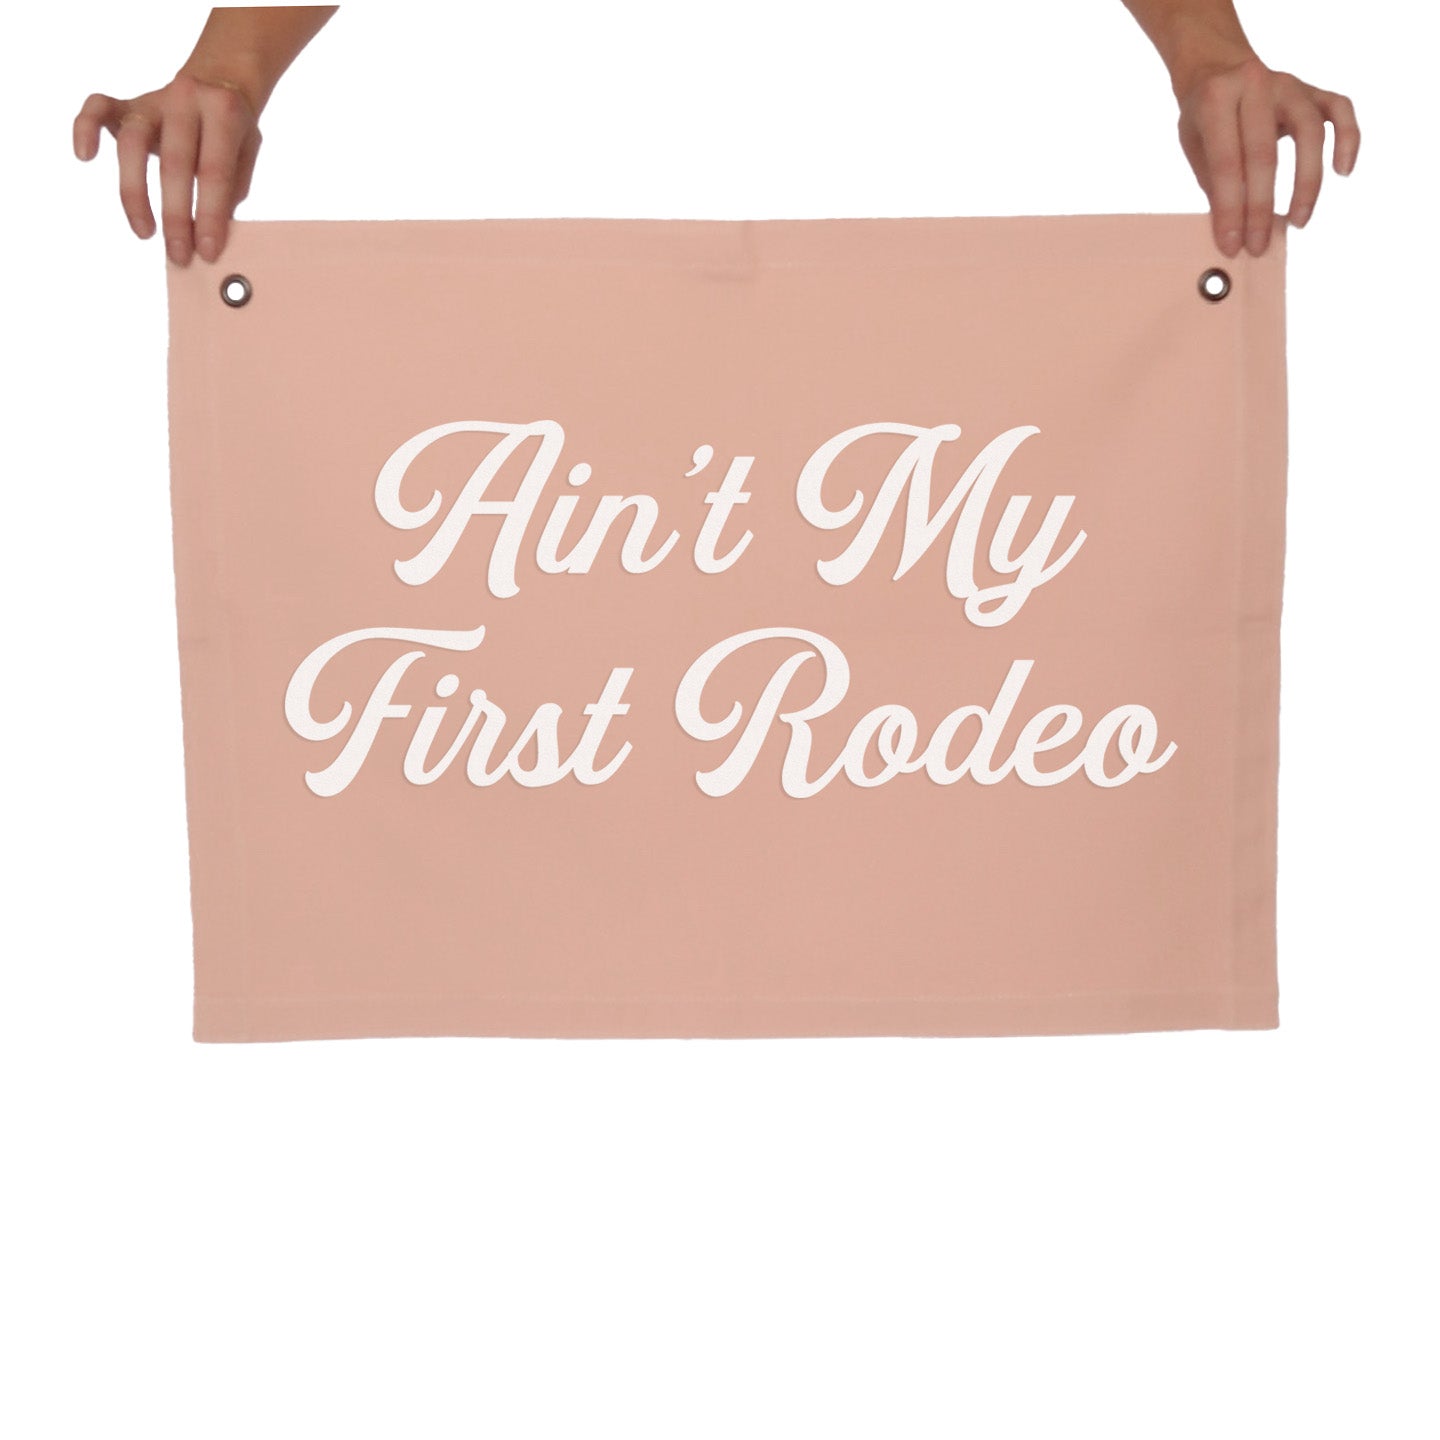 Ain't My First Rodeo Large Canvas Flag